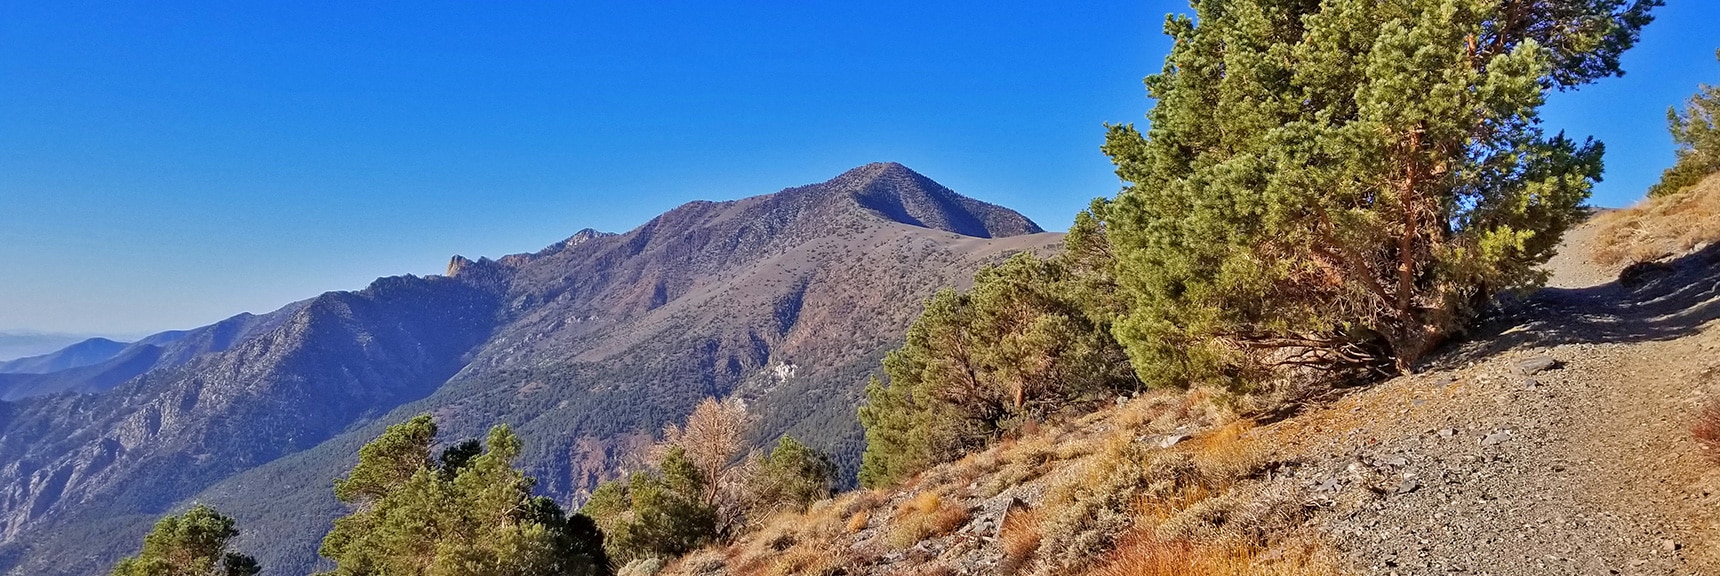 First View of Telescope Peak While Approaching Upper Spine of the Panamint Range | Telescope Peak Summit from Wildrose Charcoal Kilns Parking Area, Panamint Mountains, Death Valley National Park, California